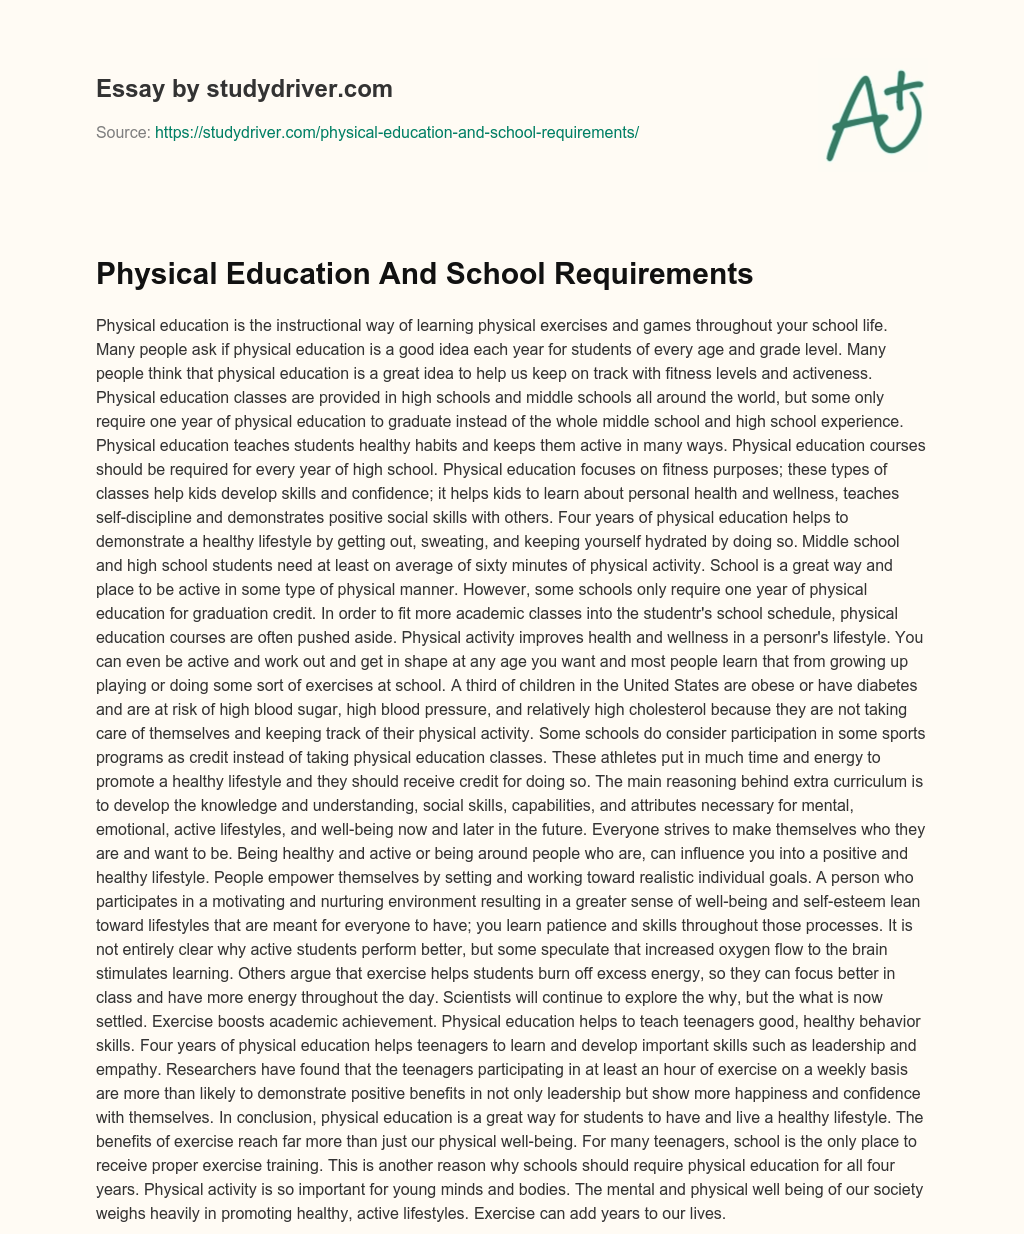 Physical Education and School Requirements essay